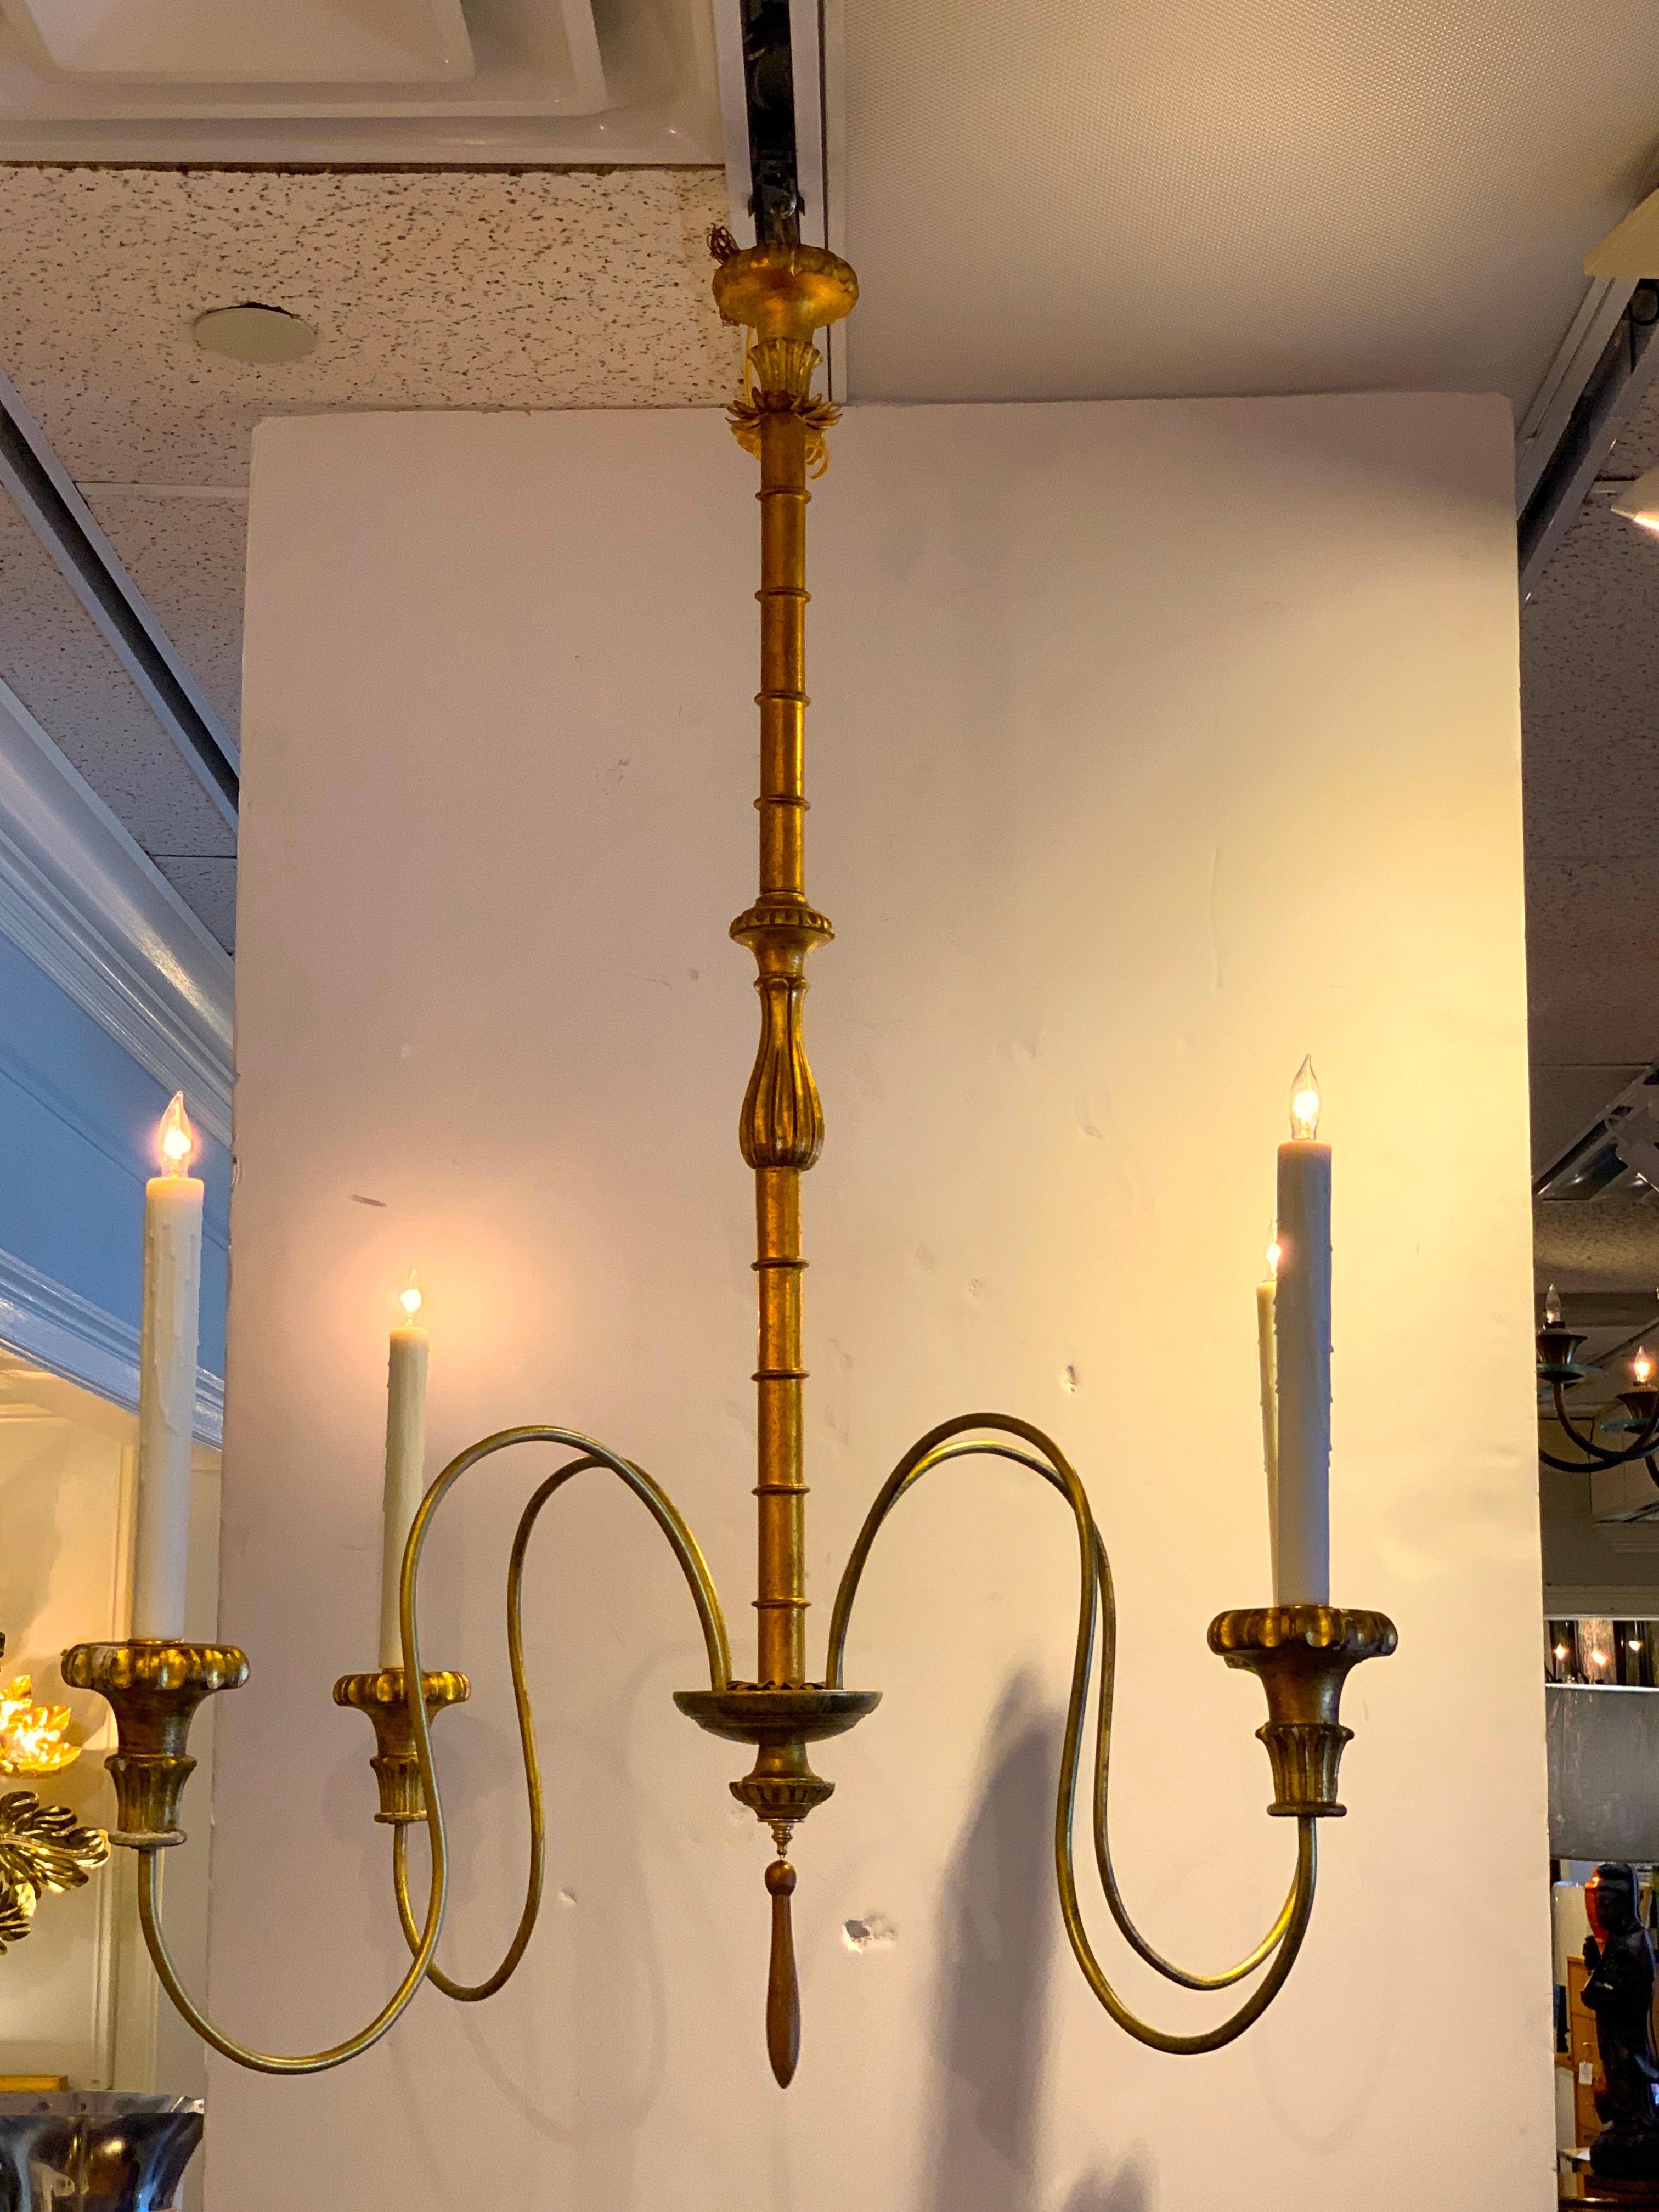 Large Scale Hollywood Regency Faux Bamboo Chandelier, 2nd  Chandelier Available
Graceful gilt metal faux bamboo center with four gilt metal arms, carved giltwood bobeches
Newly wired.